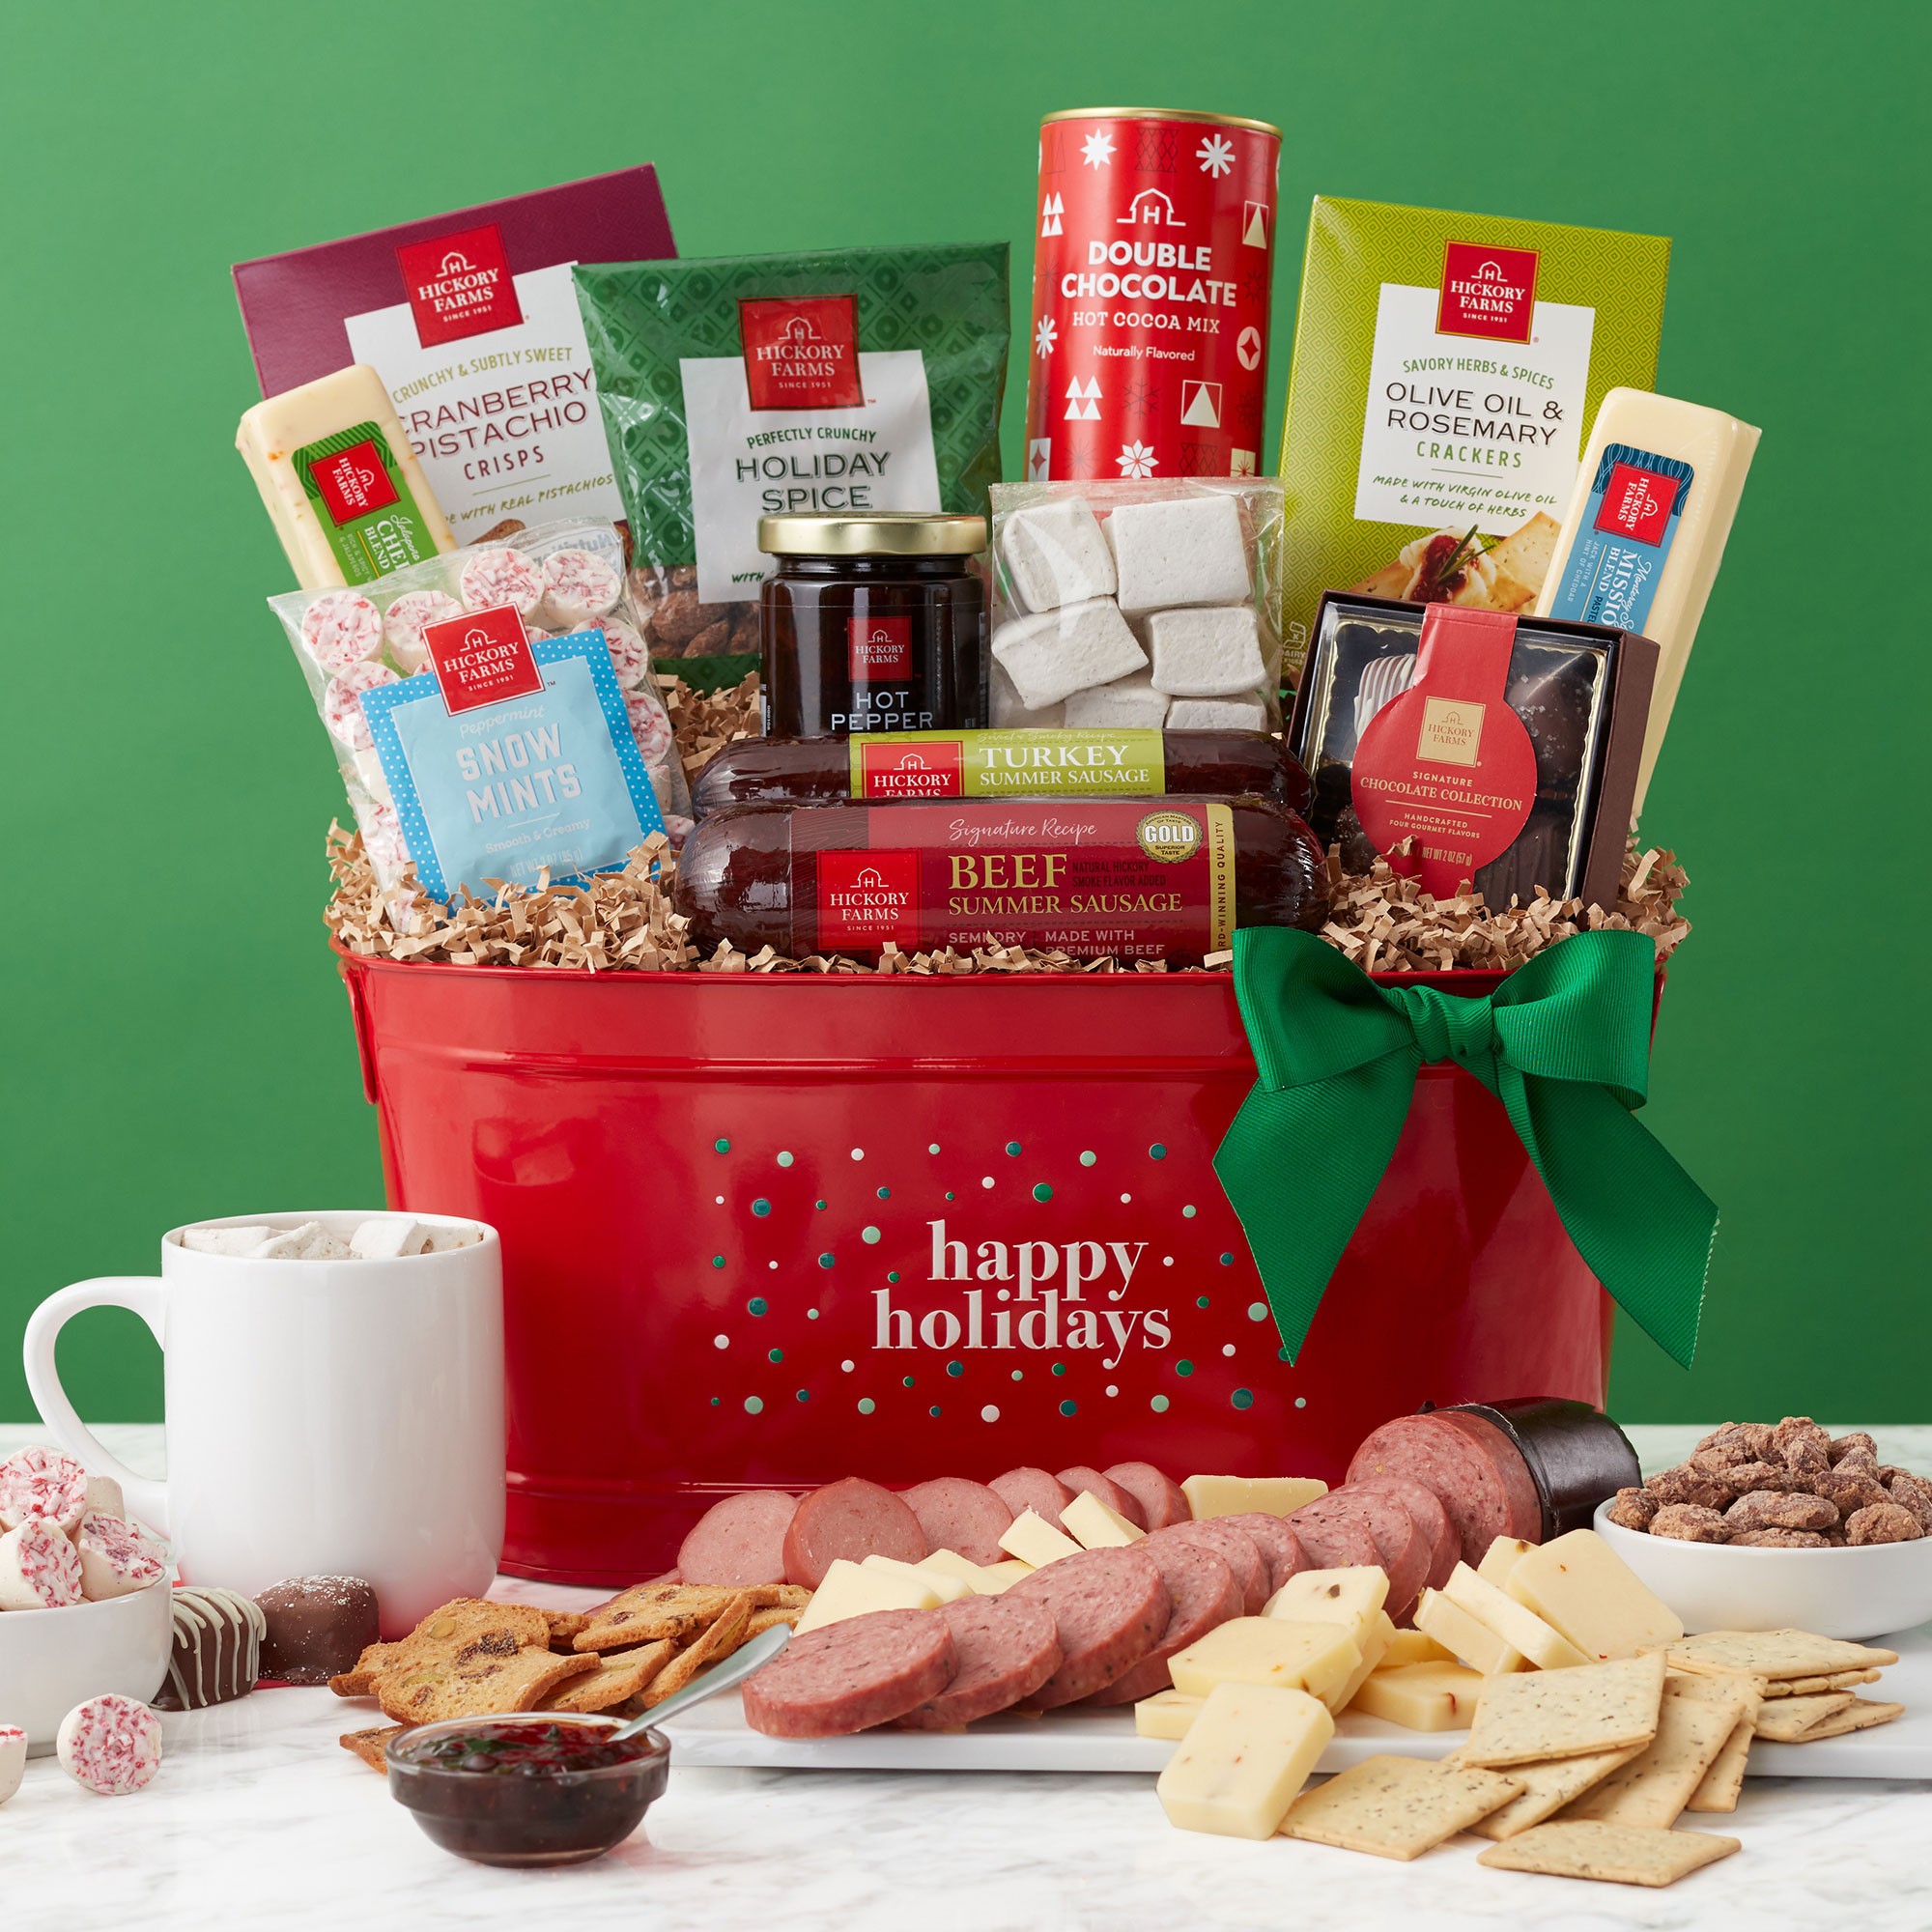 Southern Happy Holidays Gift Basket | AuntLauries.com – Aunt Laurie's